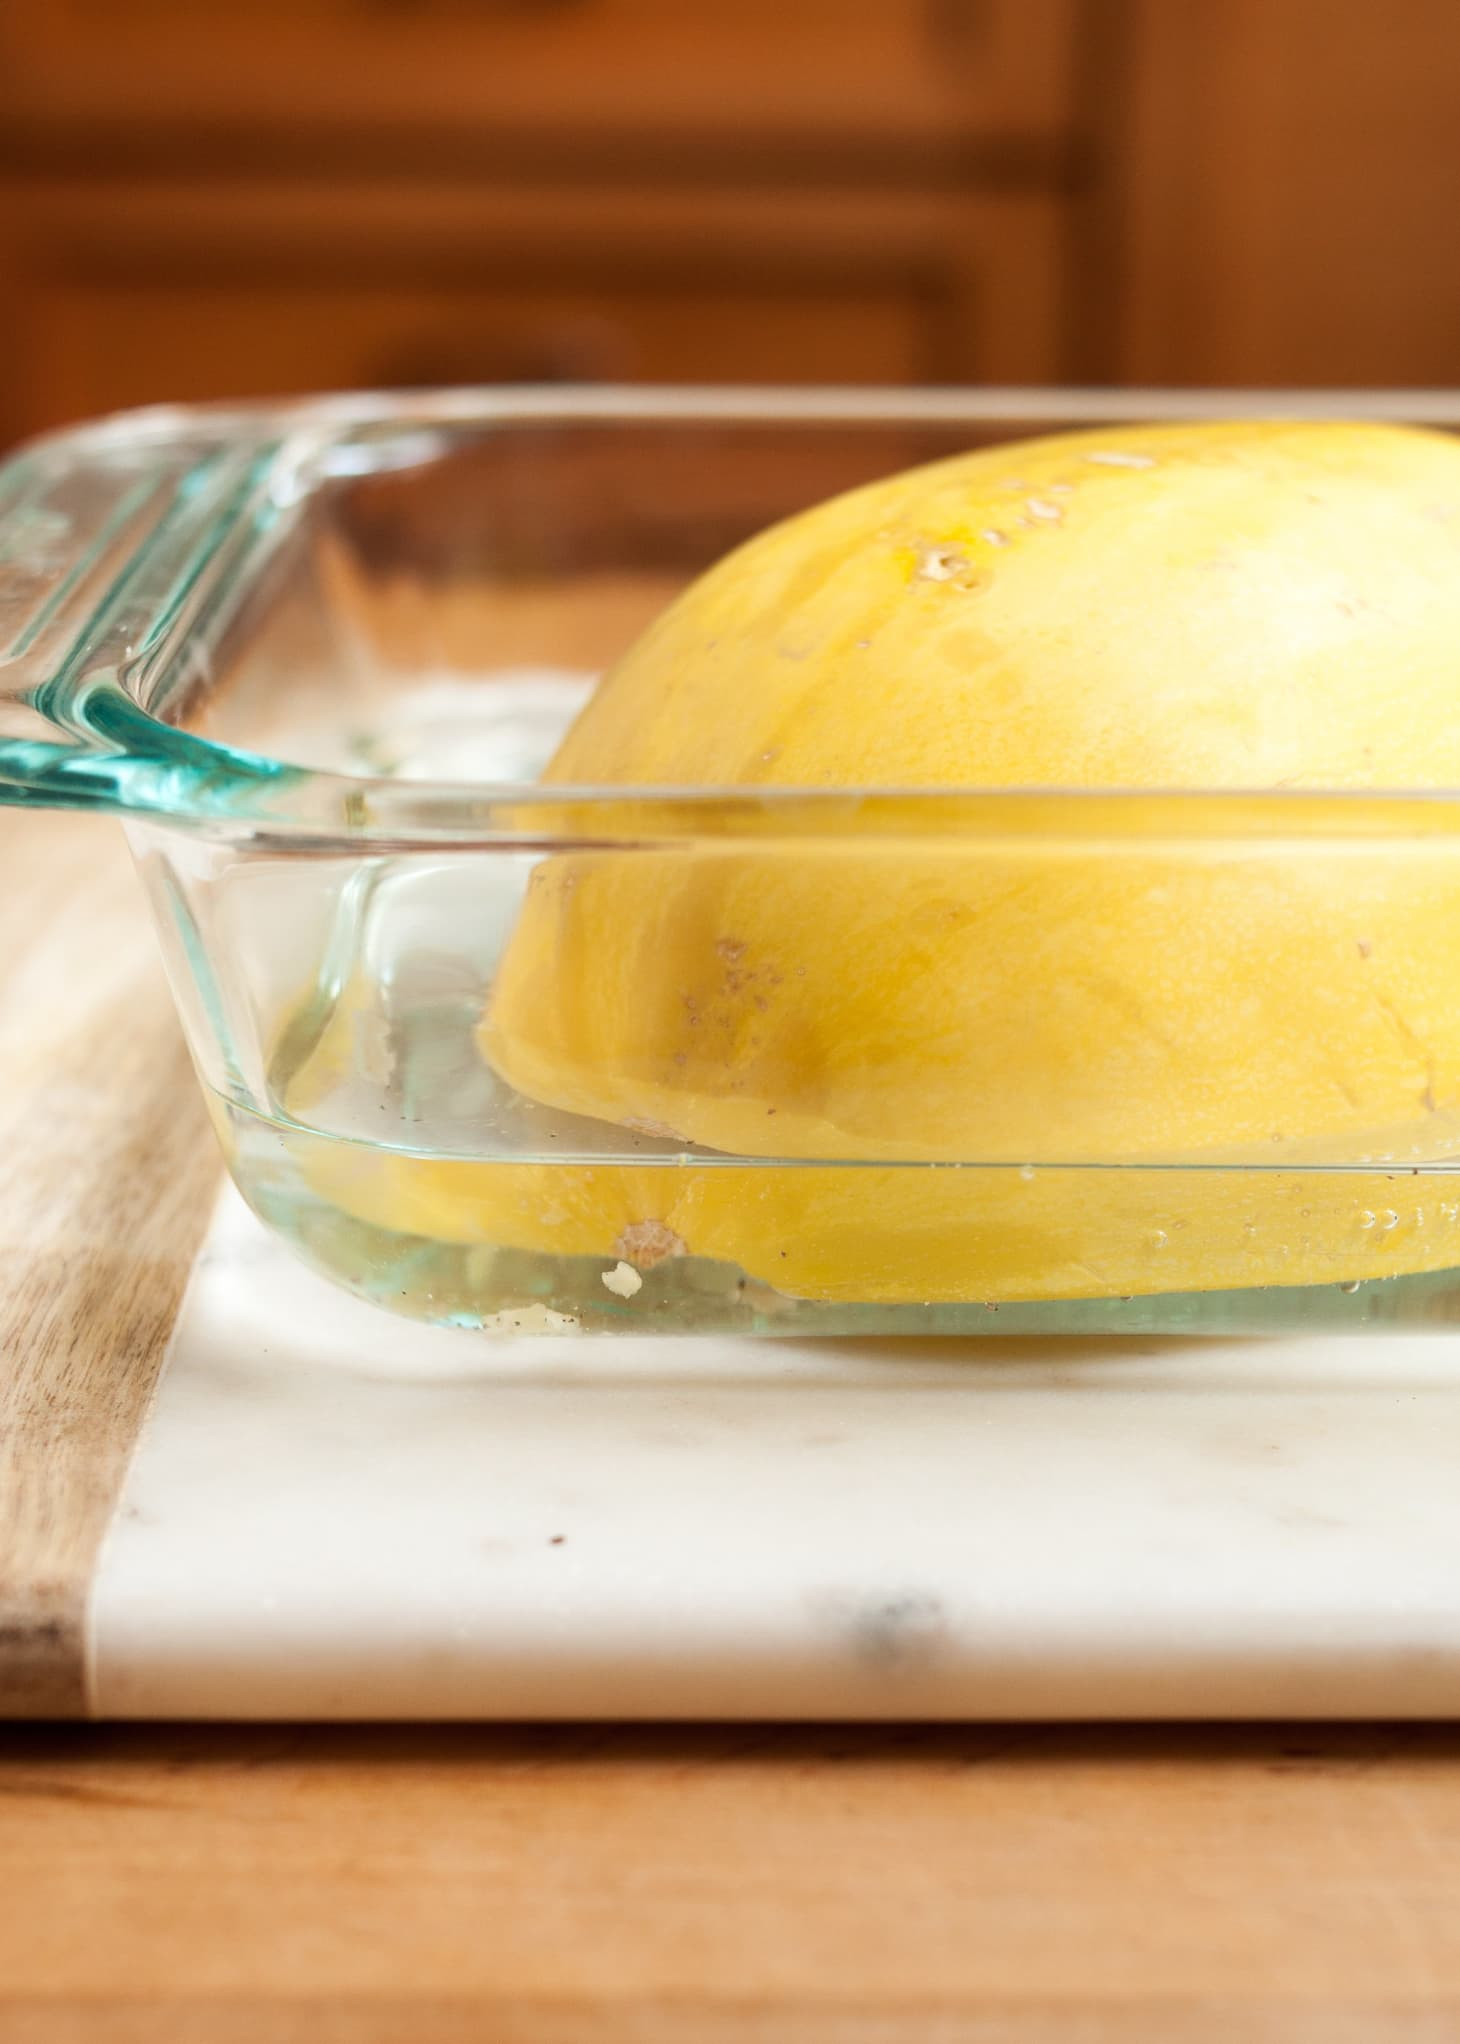 Soften Spaghetti Squash In Microwave
 How To Cook Spaghetti Squash in the Microwave